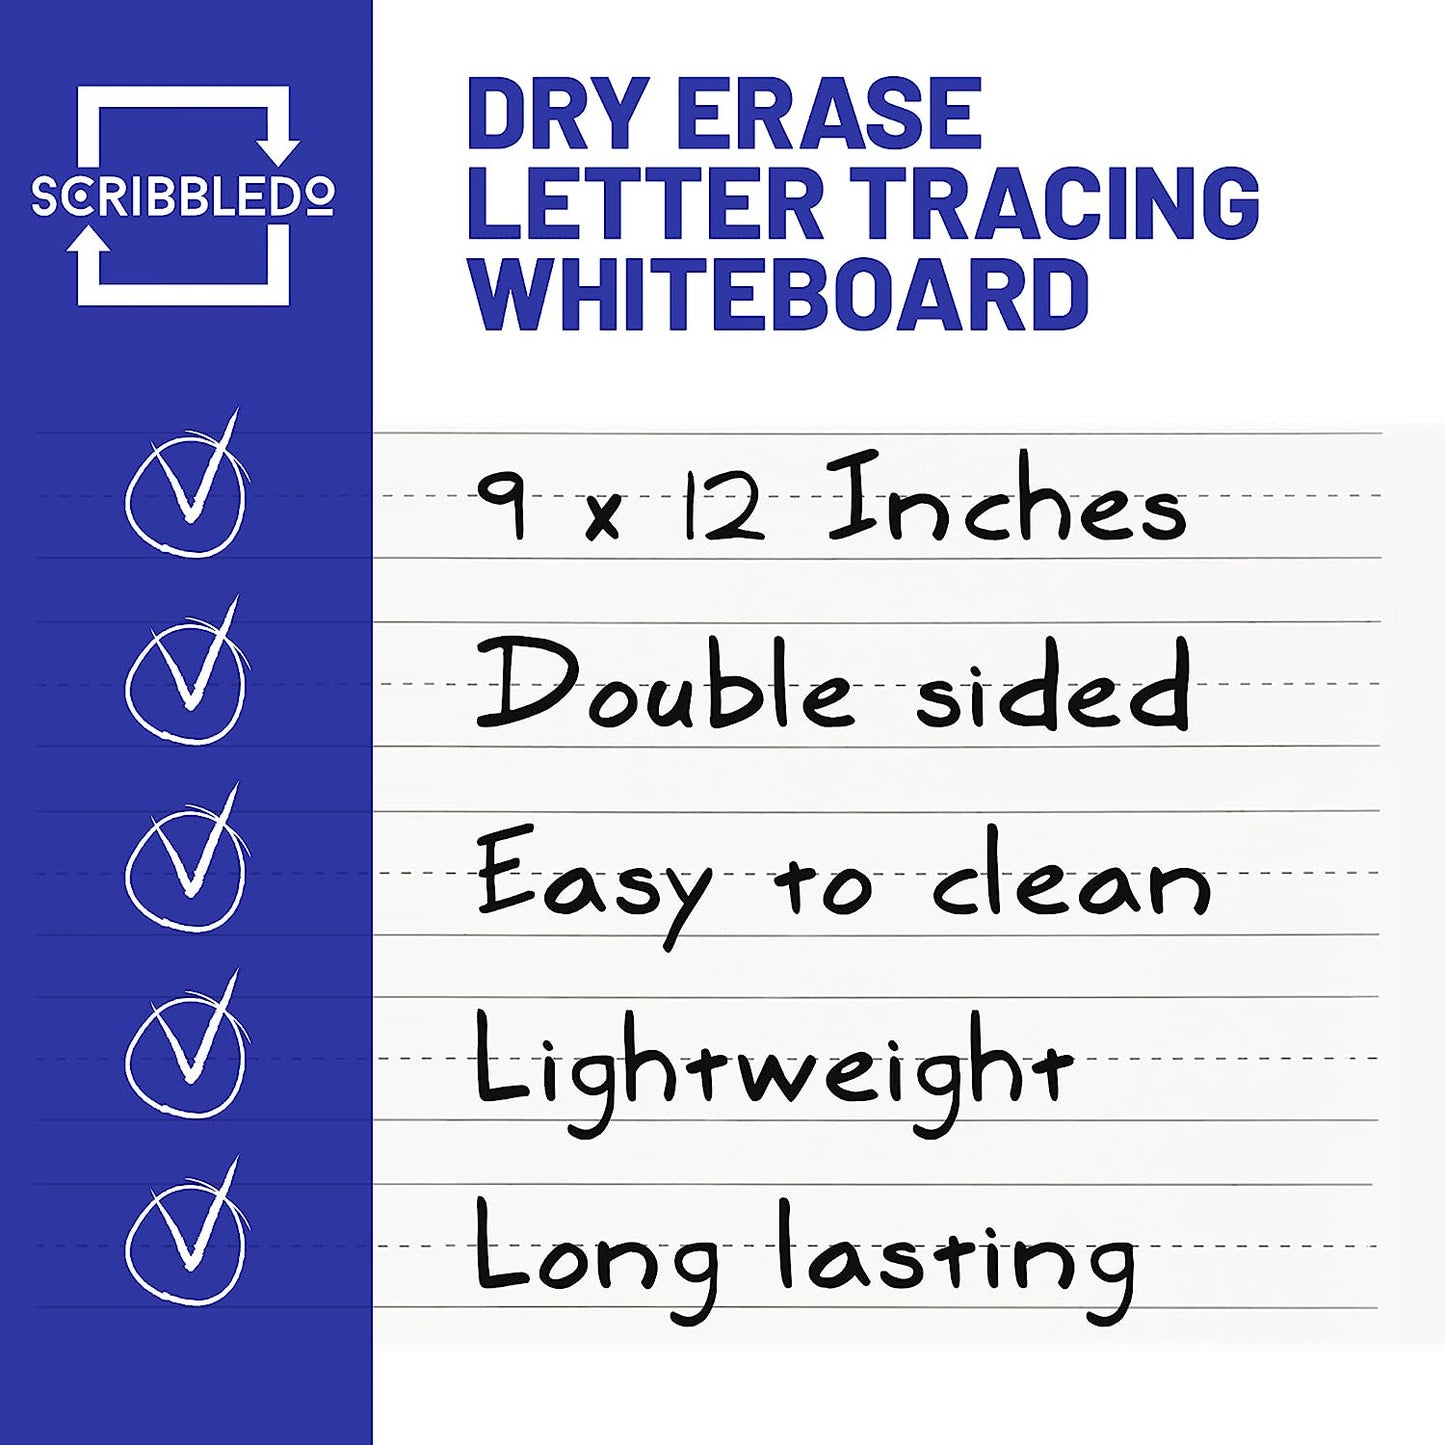 dry erase letter tracing whiteboard 9x12